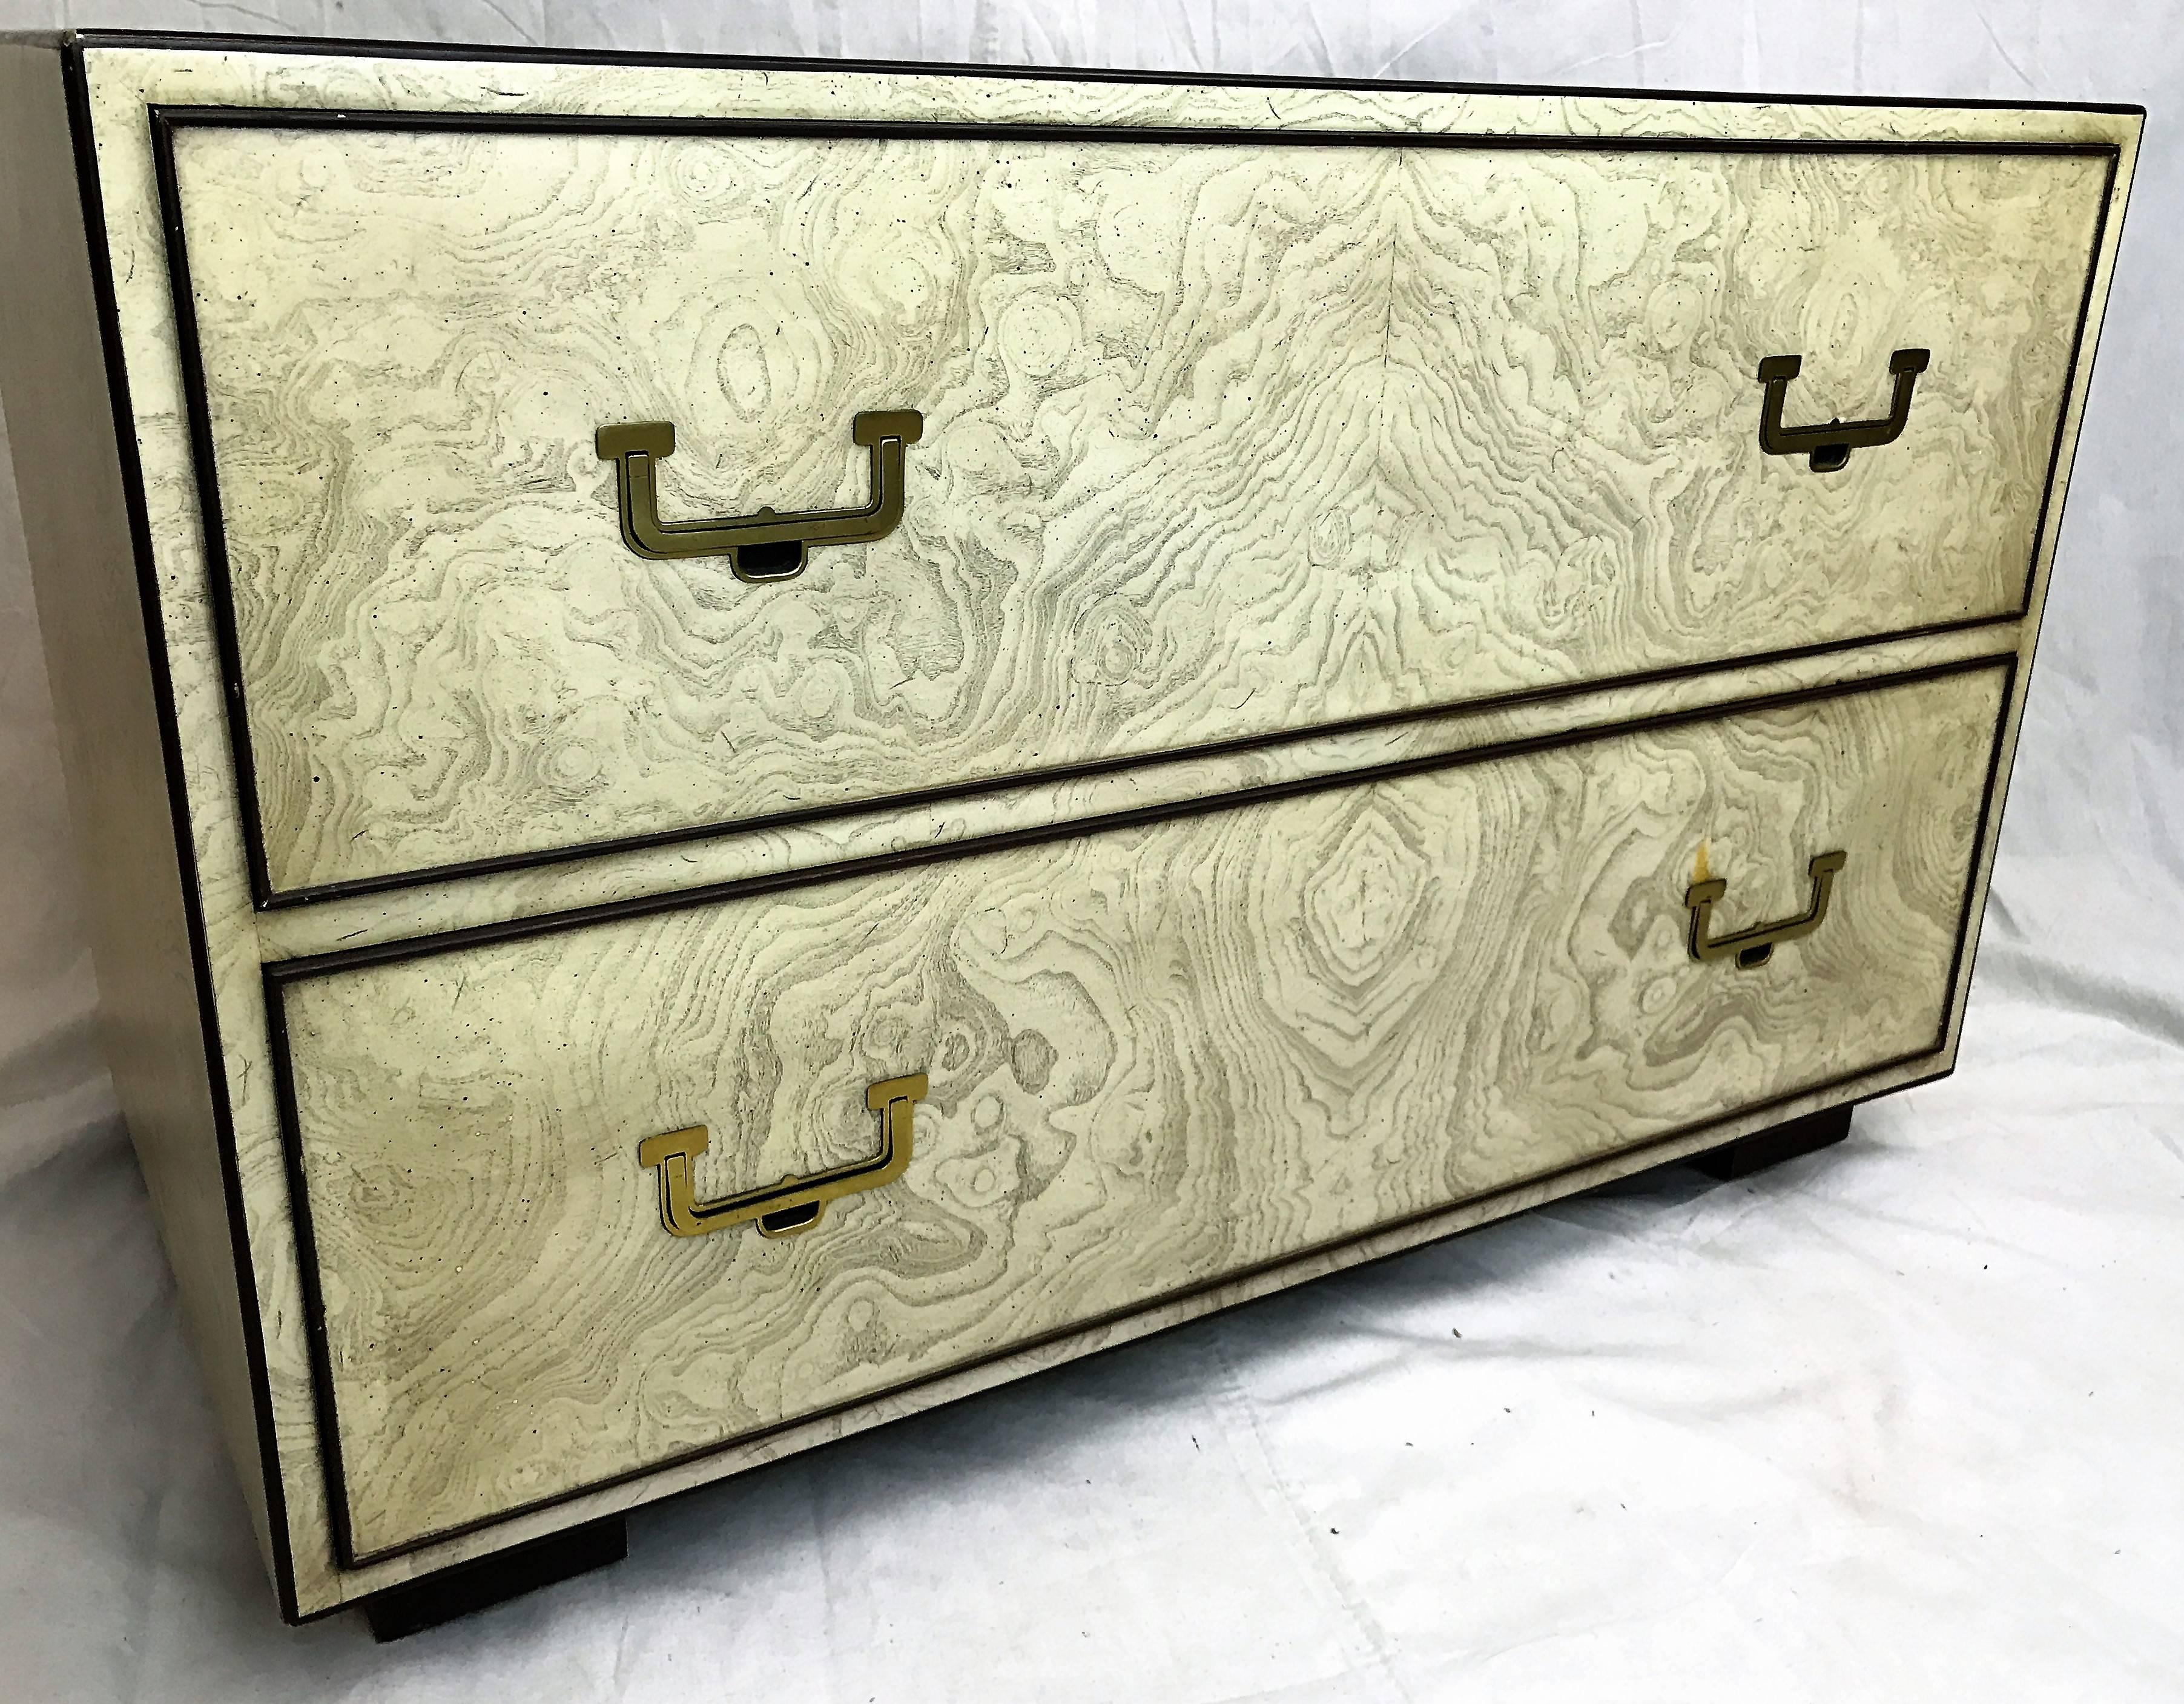 Stylish pair of burl and brass chests by Widdicomb. The beautiful burl wood graining is spectacular. The piece is finished with brass Campaign style hardware. Labelled John Widdicomb, Grand Rapids, USA.
  